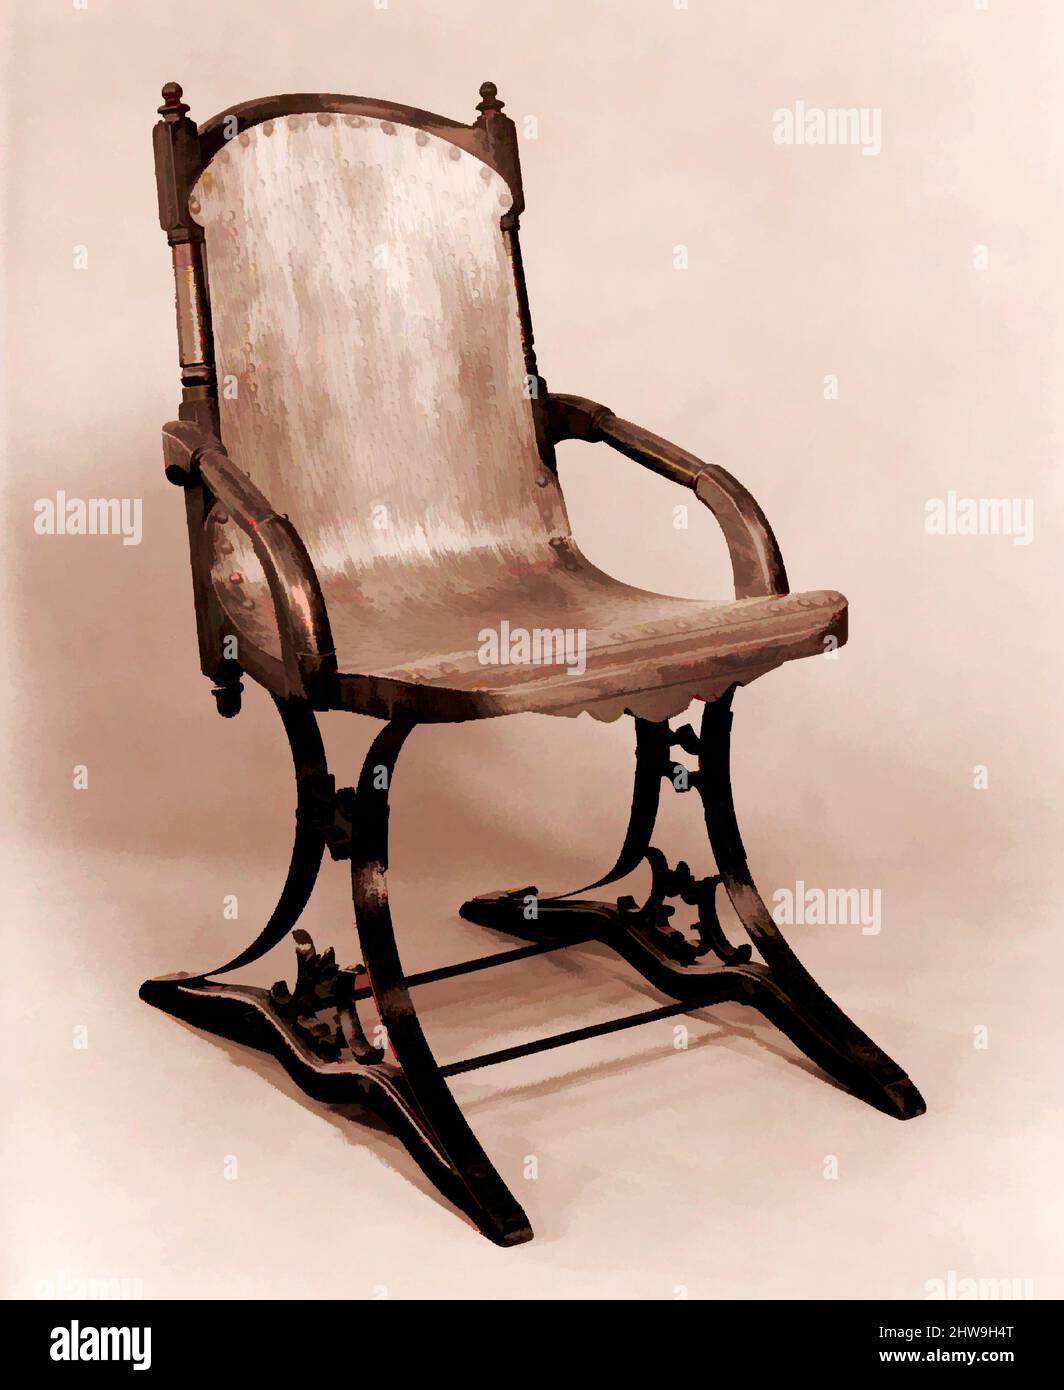 Art inspired by Platform Rocking Chair, patented 1872, Made in New York, United States, American, Walnut, plywood, cast iron, 36 x 21 1/2 x 25 3/4 in. (91.4 x 54.6 x 65.4 cm), Furniture, Gardner and Company (1863–1888, Classic works modernized by Artotop with a splash of modernity. Shapes, color and value, eye-catching visual impact on art. Emotions through freedom of artworks in a contemporary way. A timeless message pursuing a wildly creative new direction. Artists turning to the digital medium and creating the Artotop NFT Stock Photo